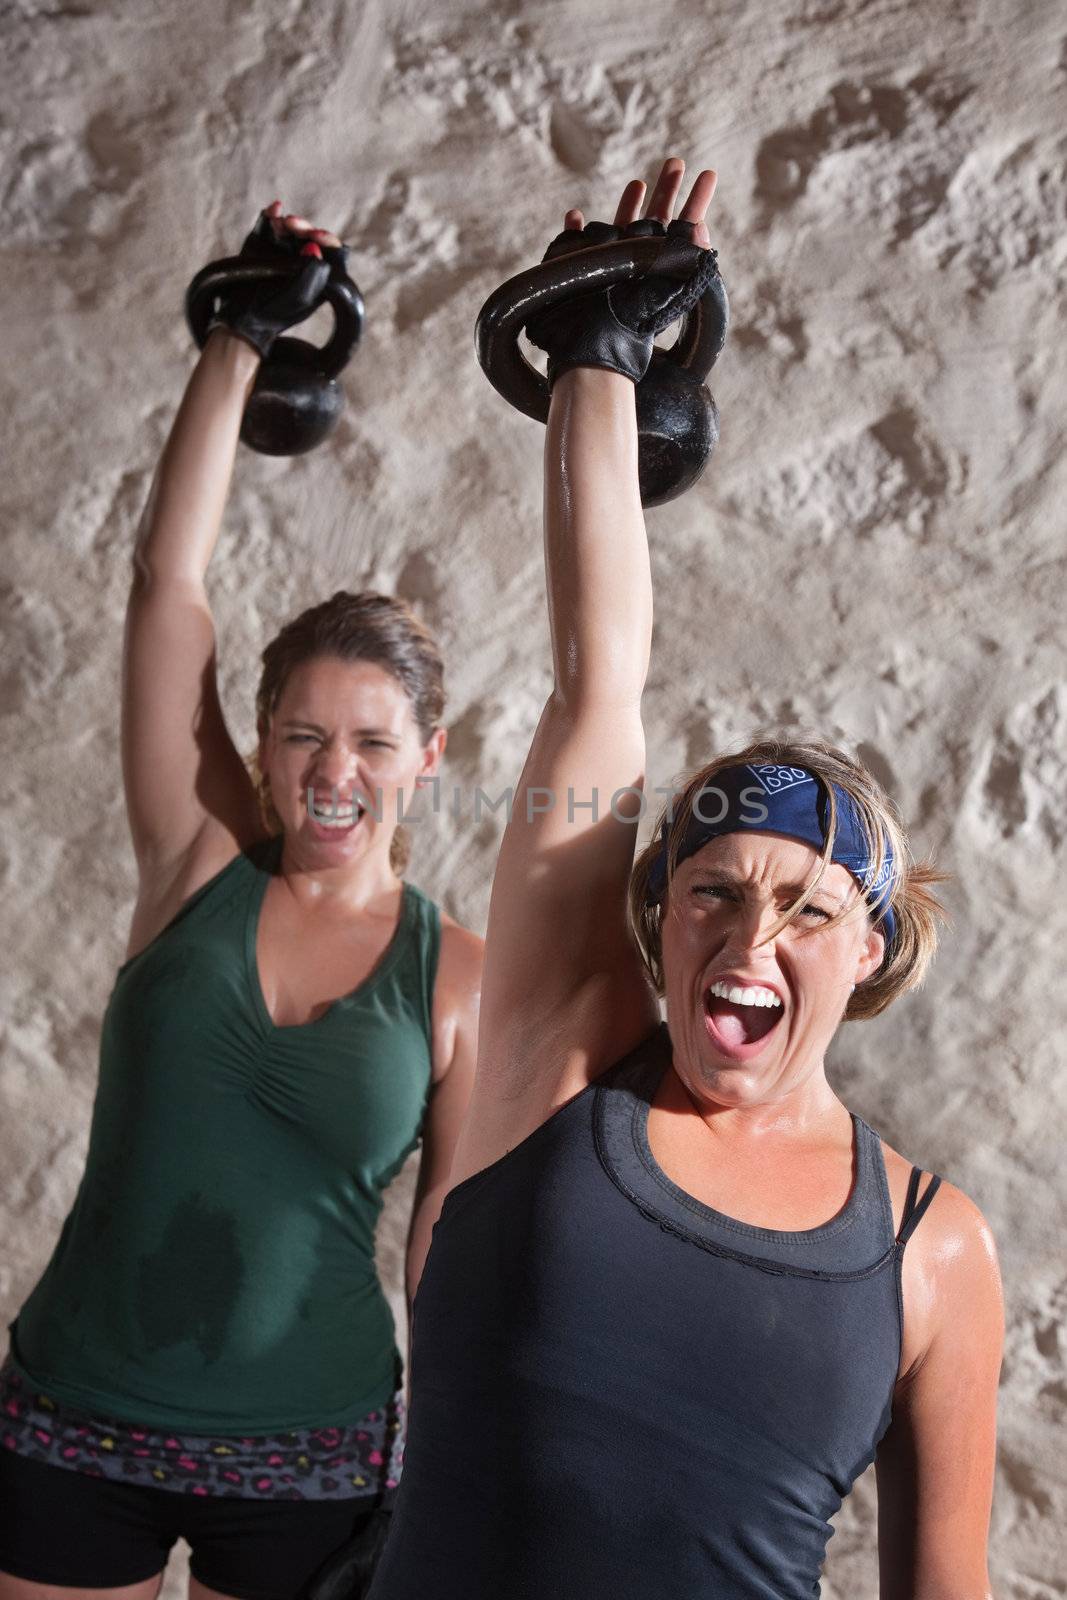 Instense women shout as they push kettle bell weights up